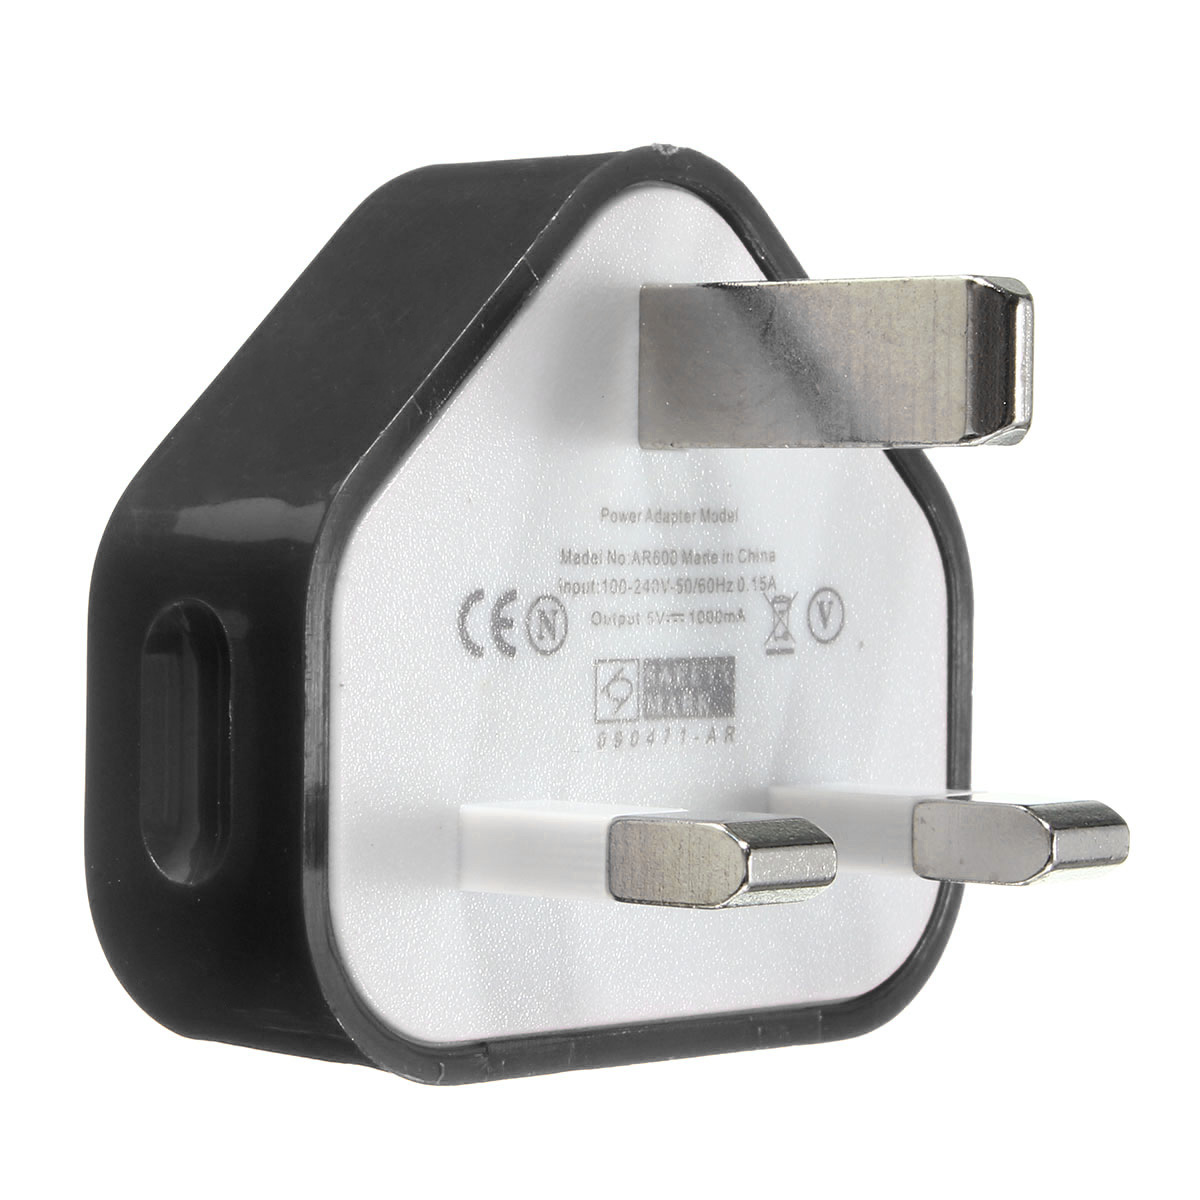 UK-USB-Plug-Charger-Mains-Wall-Home-Adapter-For-Samsung-Android-Phone-Tablets-1191576-10